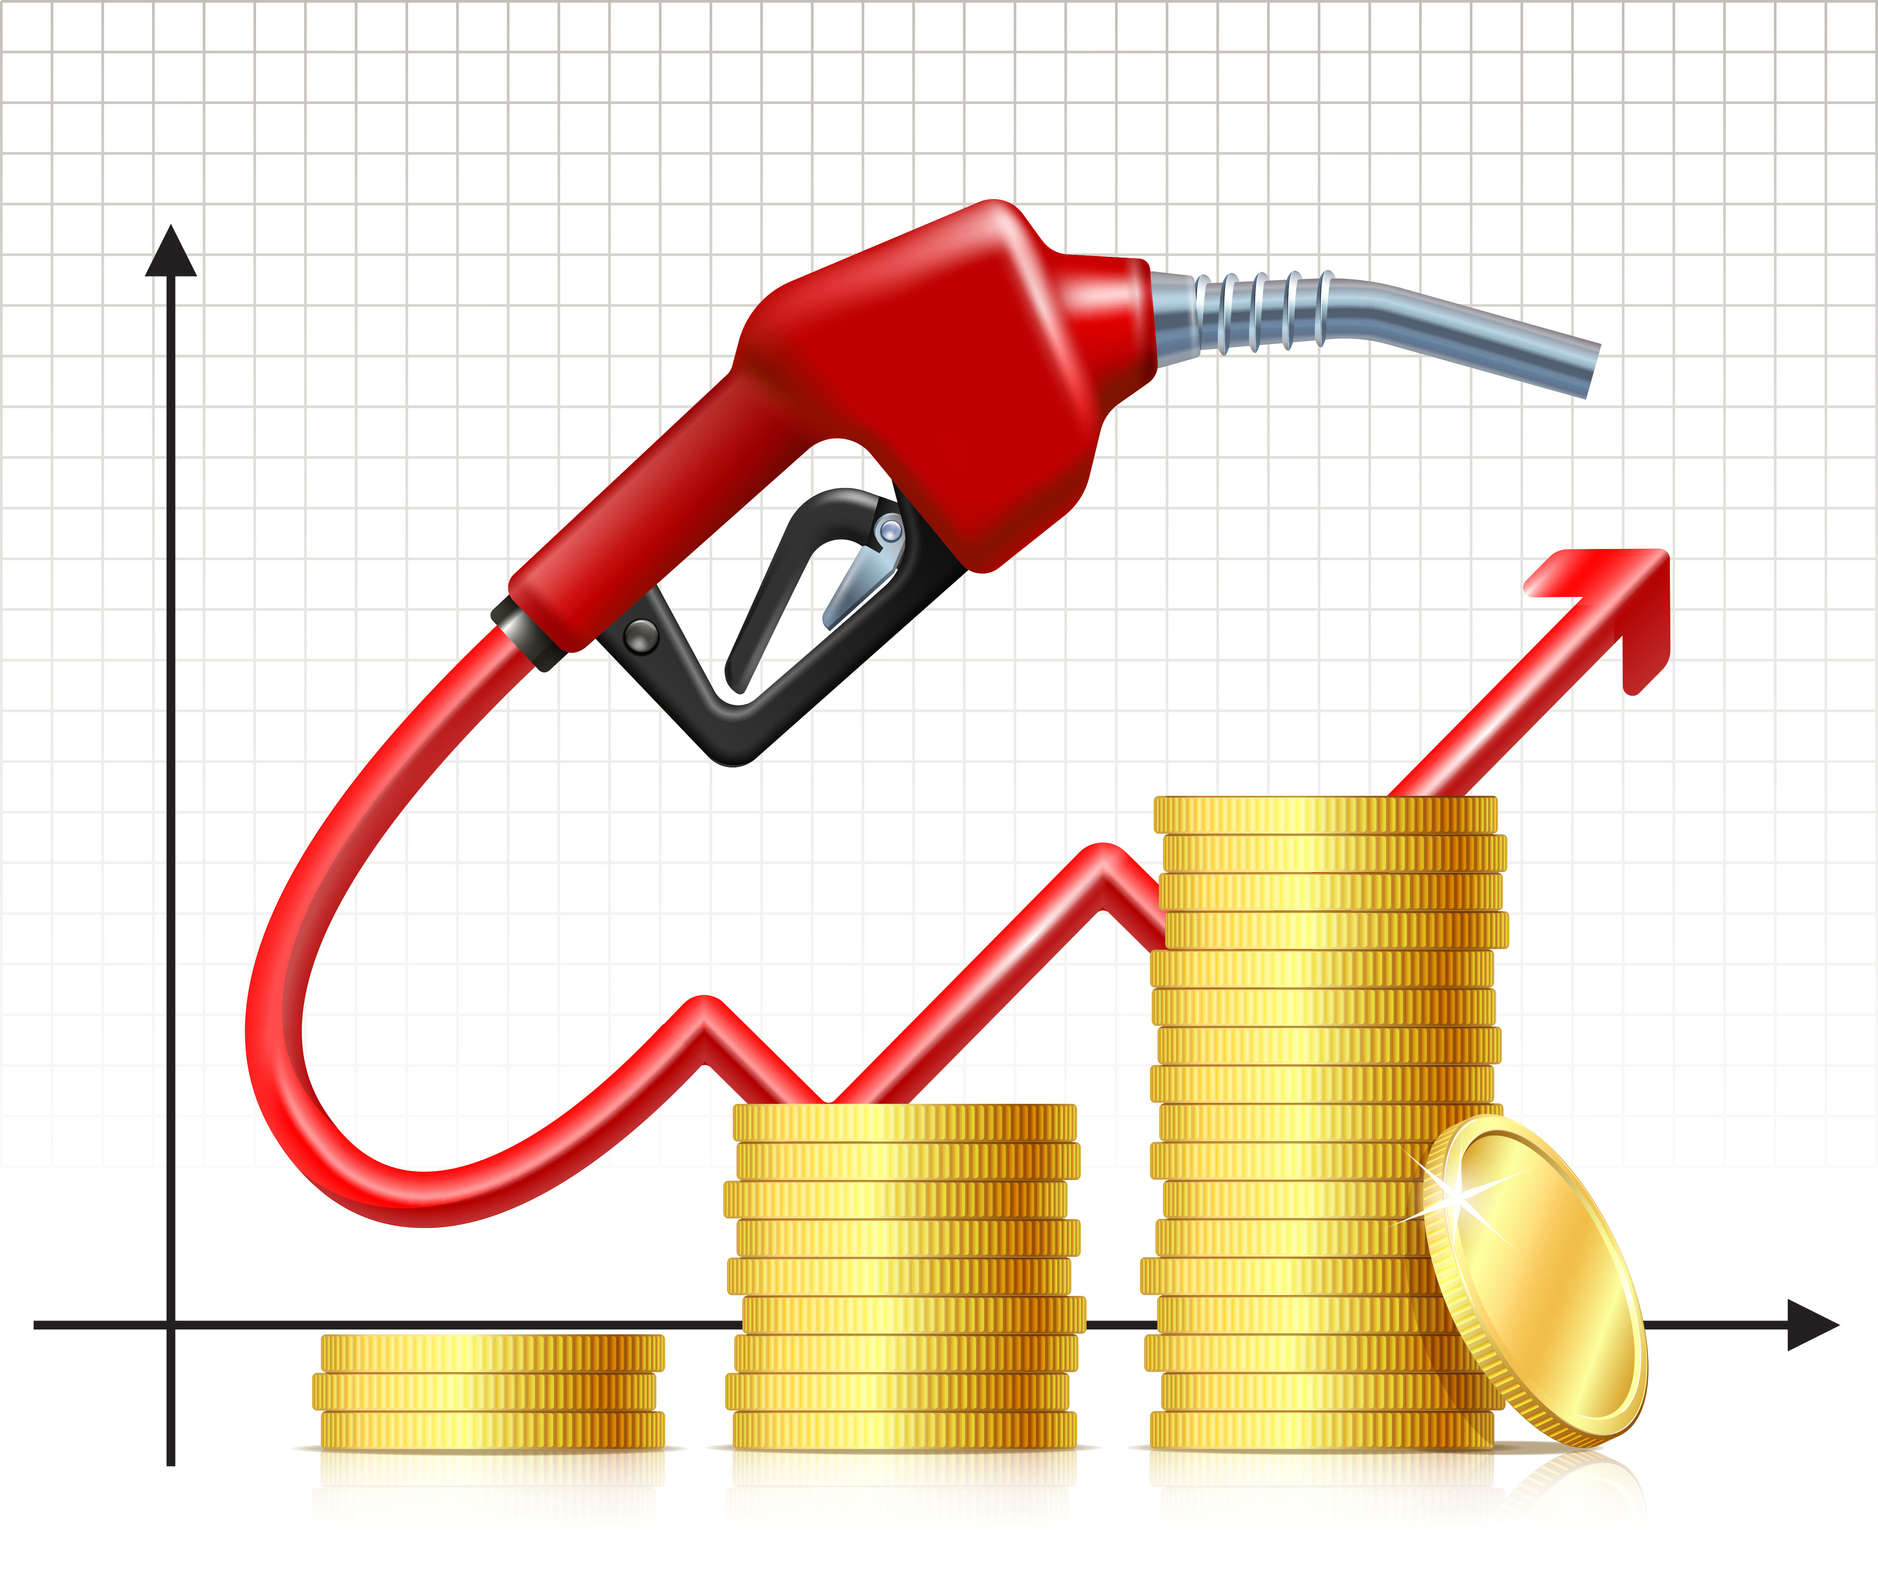 Fuel Price Hike: Fuel rates: Petrol, diesel prices rise again, reach record highs, Energy News, ET EnergyWorld